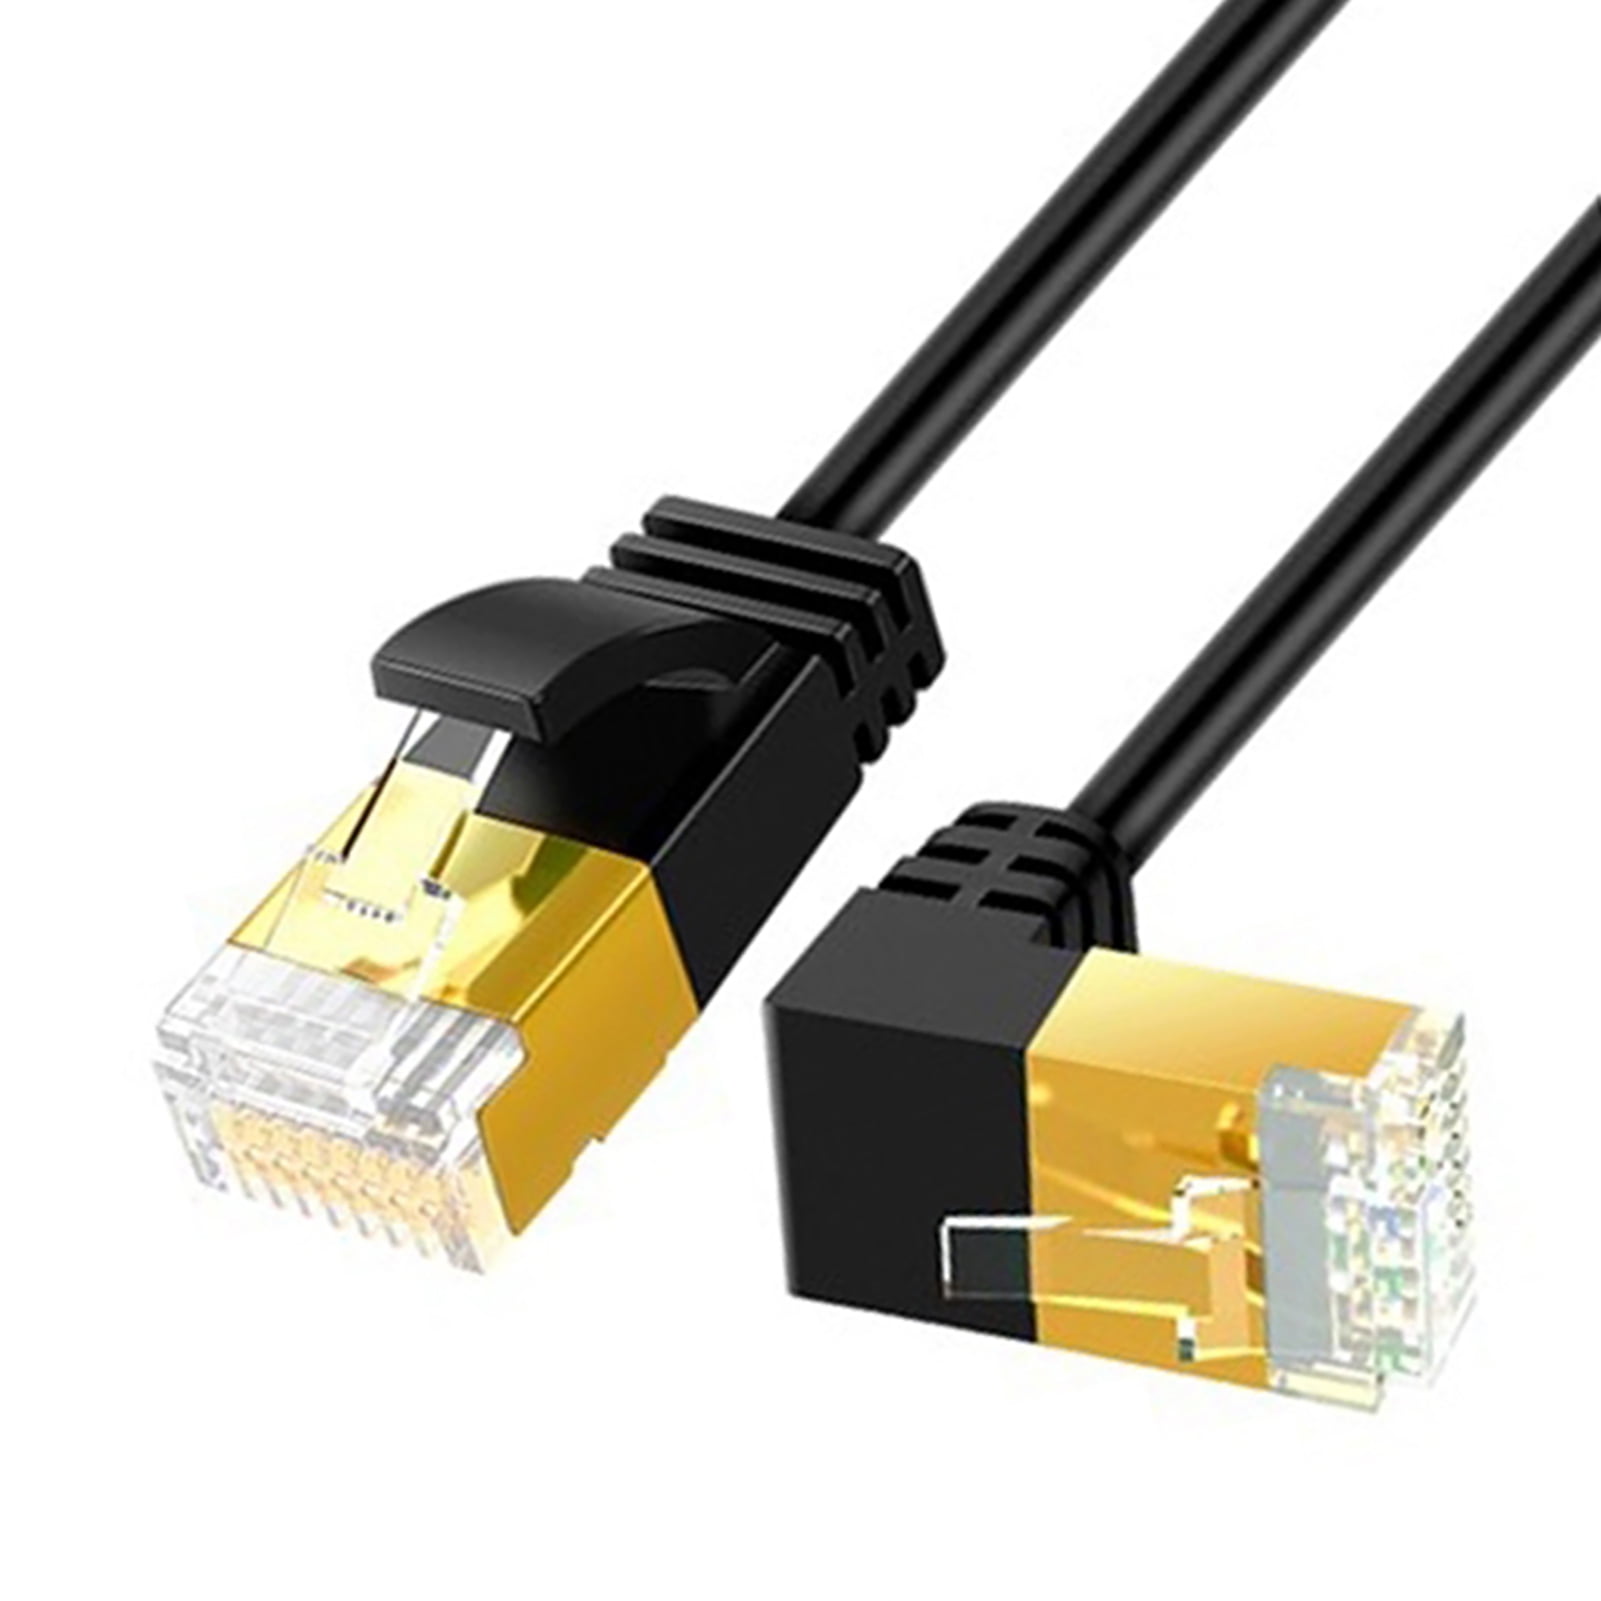 Perceptible cooperar Coche Ethernet Cable High-speed Transmission Plug Play 90 Degree Cat7 RJ45 Flat  Network Cable for Router,Black - Walmart.com